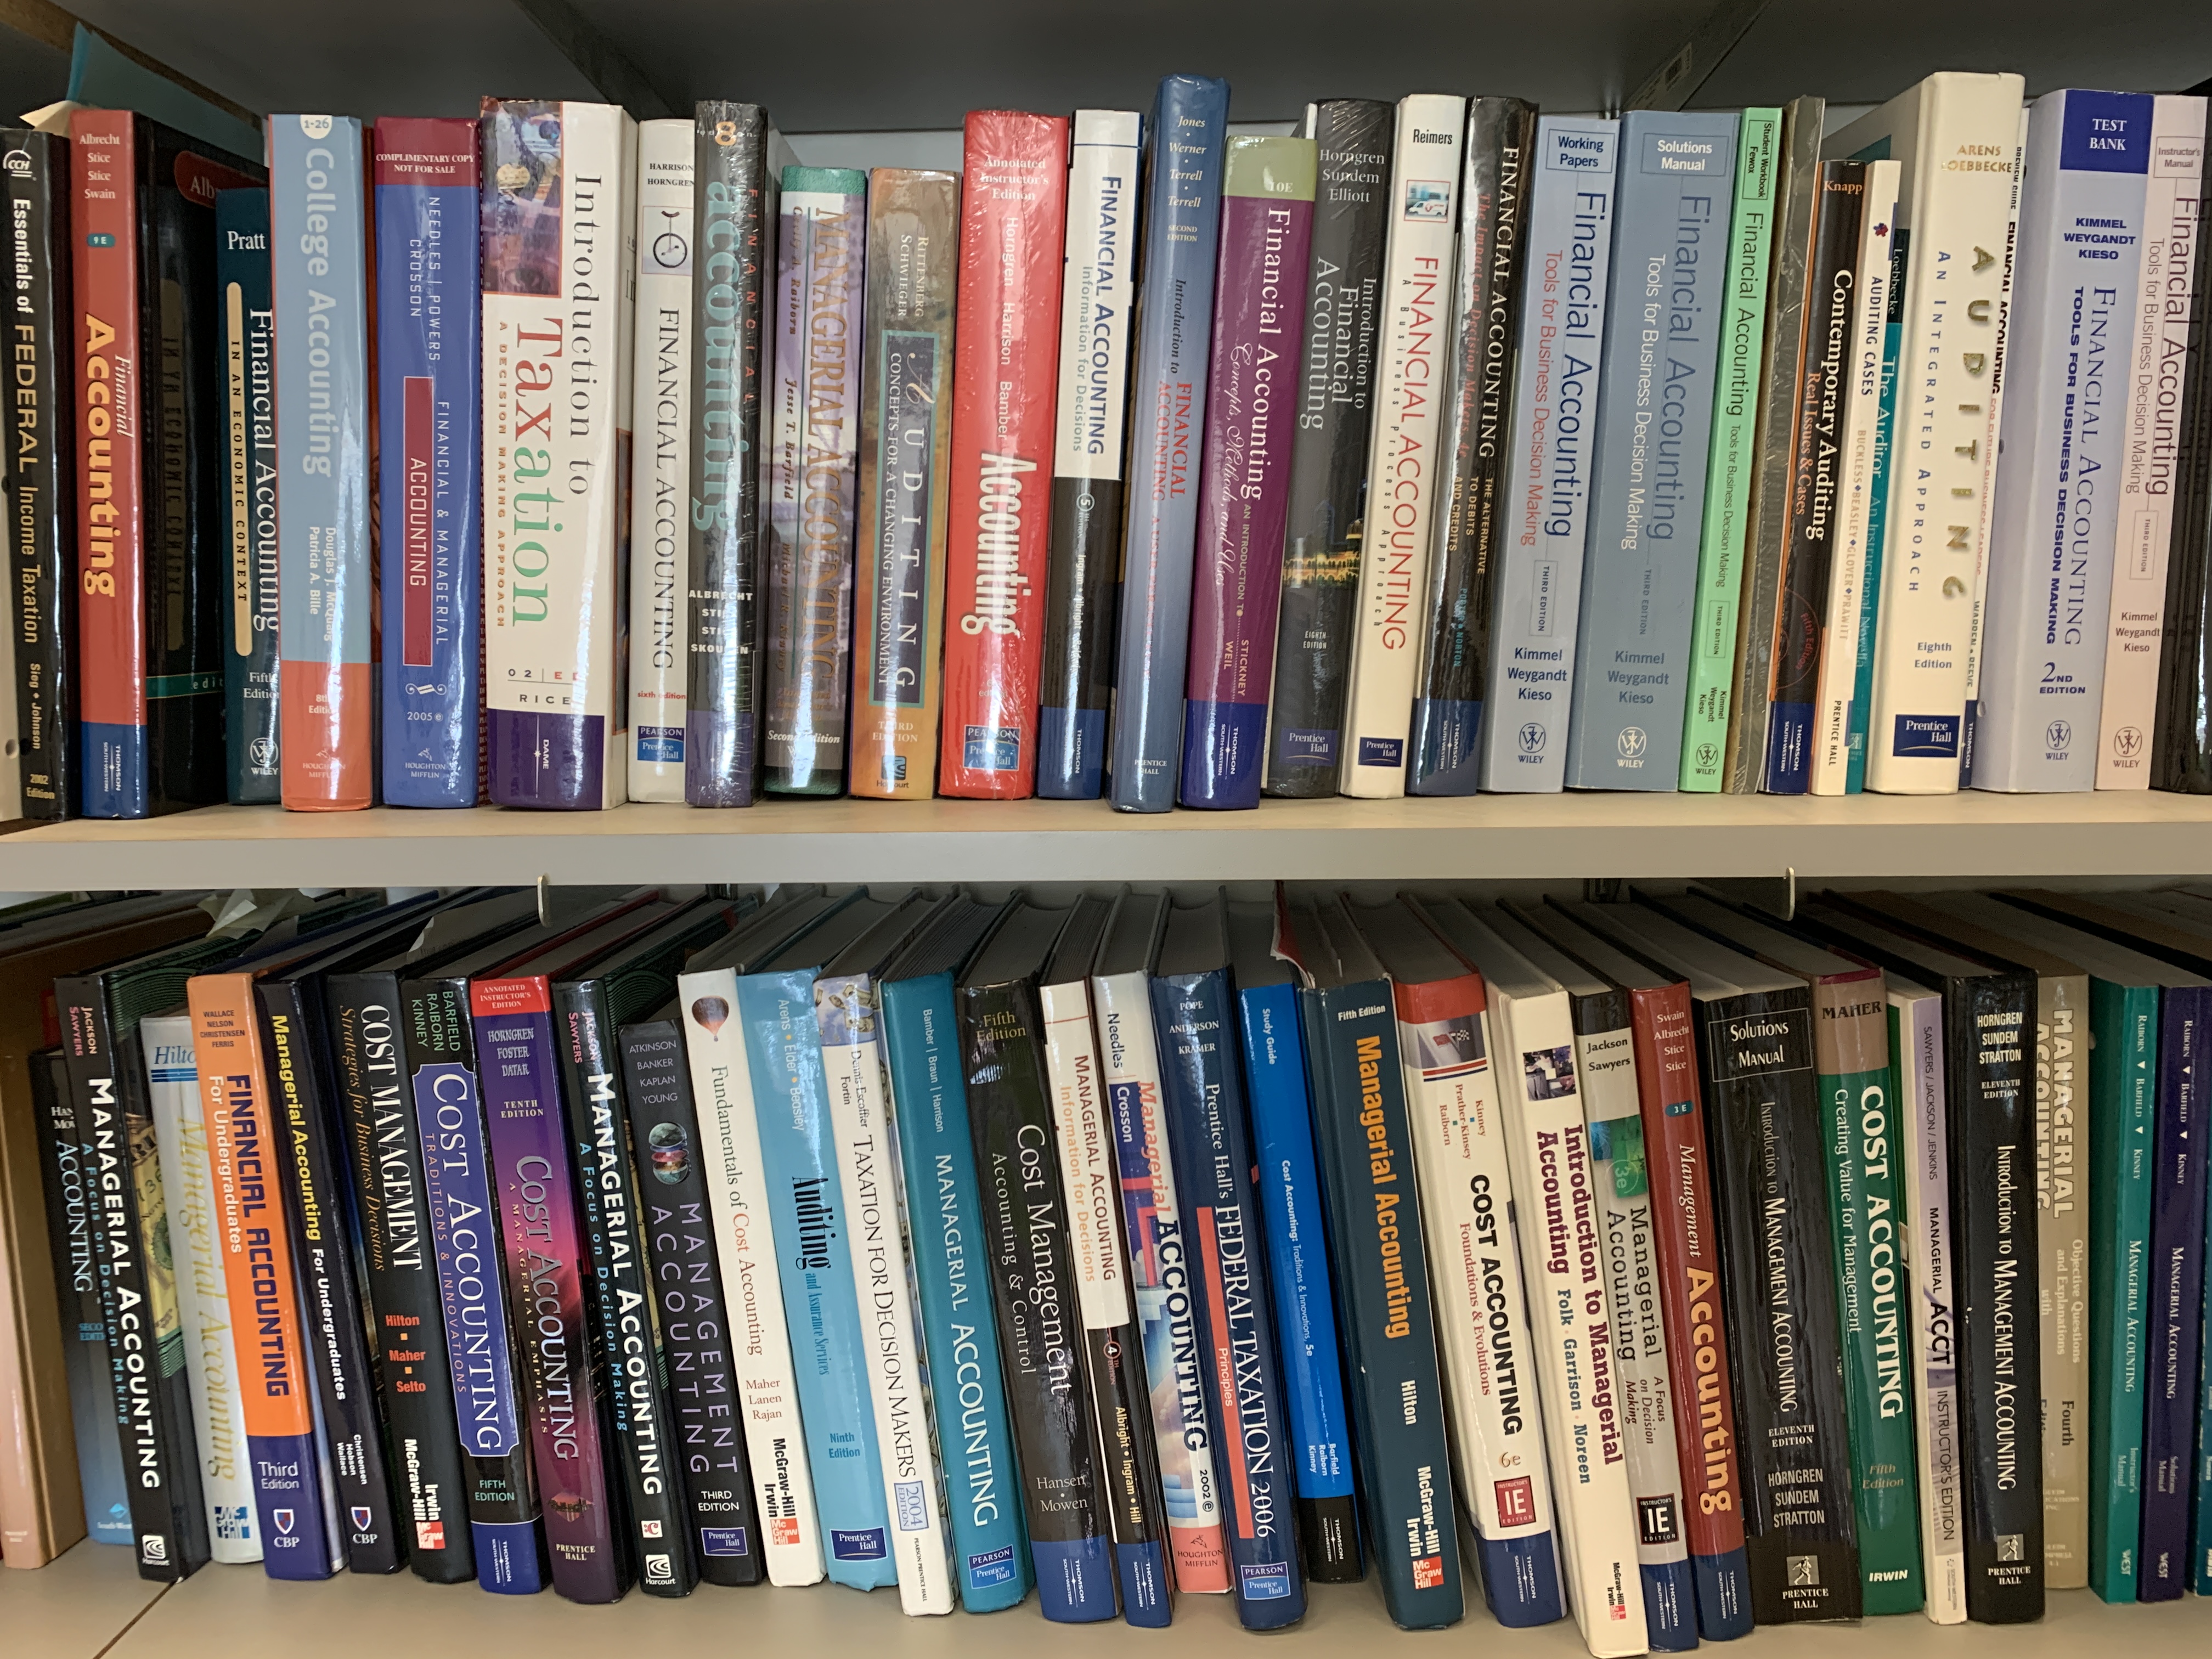 A bookshelf is packed with books of various sizes and colors.